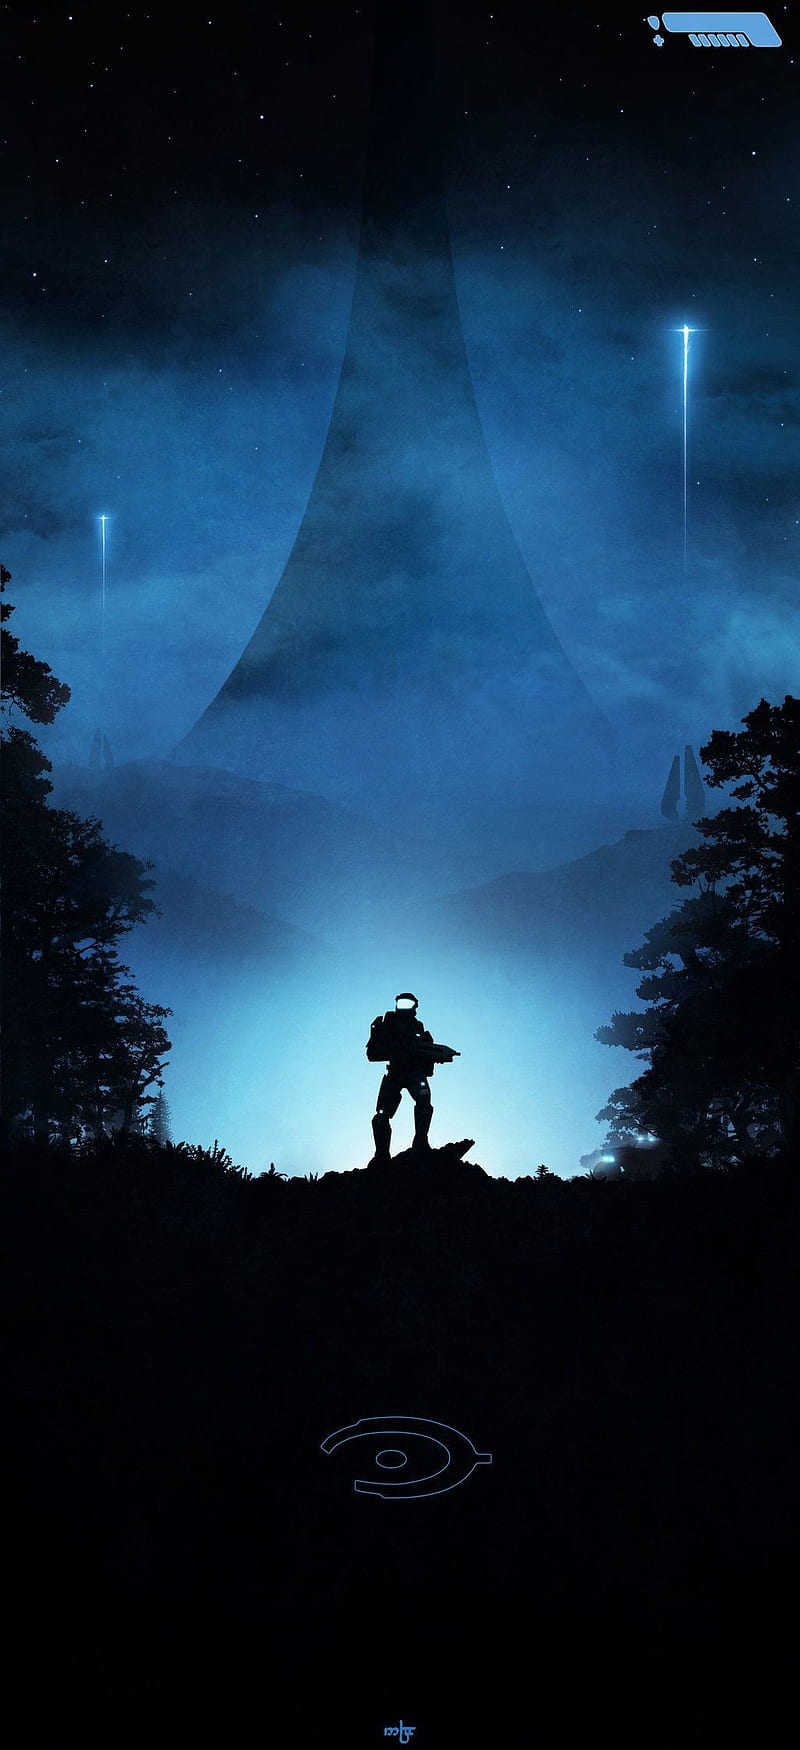 Wallpaper ID 431576  Video Game Halo 3 ODST Phone Wallpaper  750x1334  free download